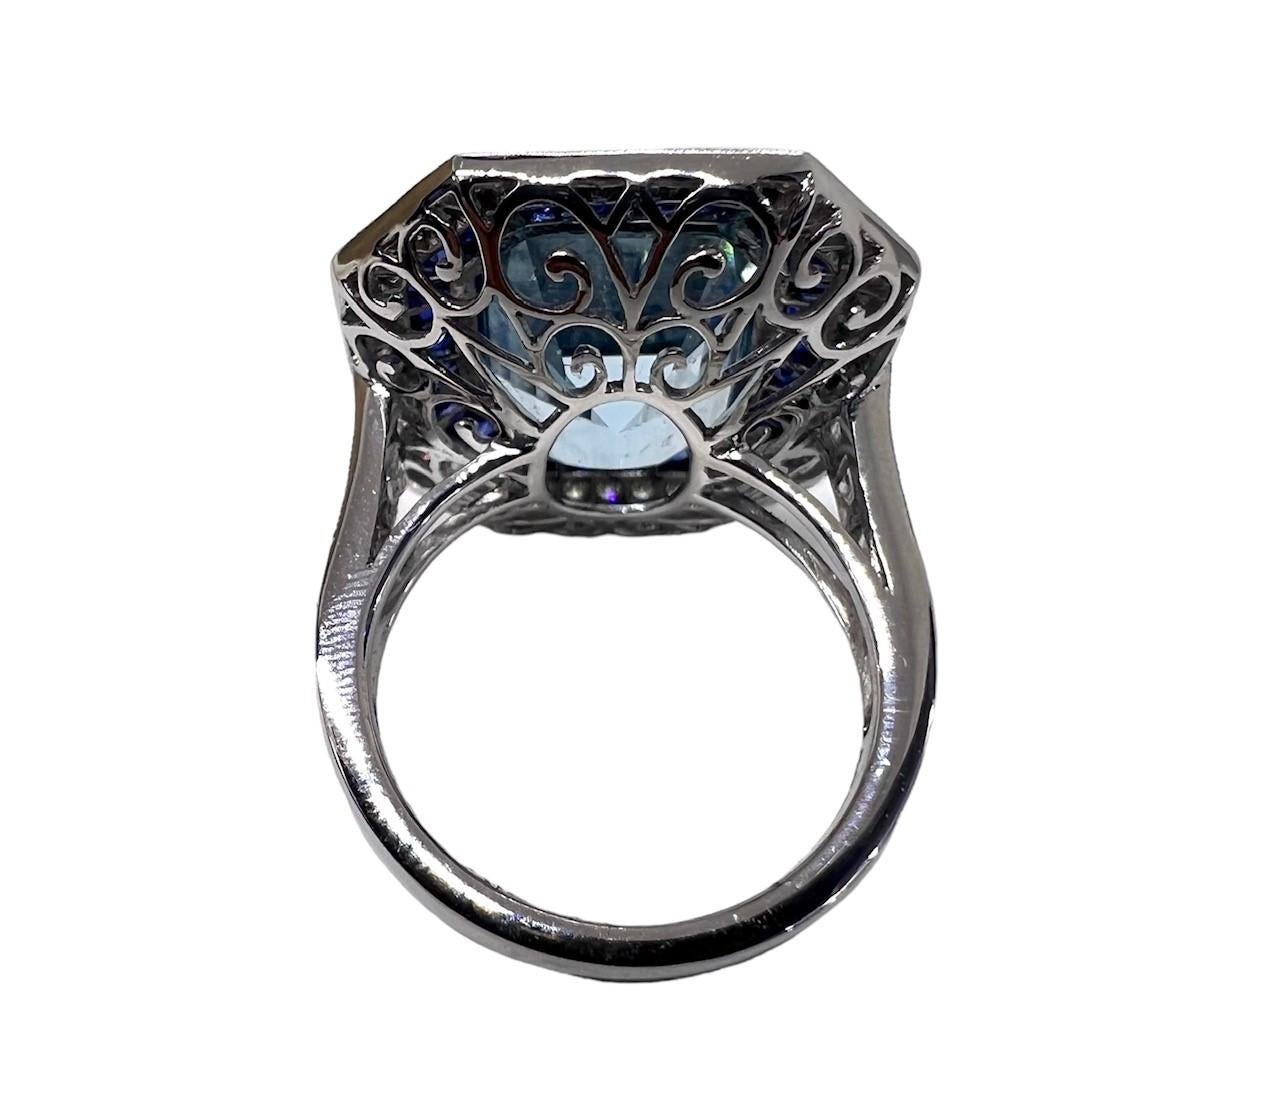 Platinum ring by Sophia D with 9.20 carats of aquamarine center stone accented by blue sapphires weighing 1.27 carats and 1.20 carats of diamonds.

Sophia D by Joseph Dardashti LTD has been known worldwide for 35 years and are inspired by classic